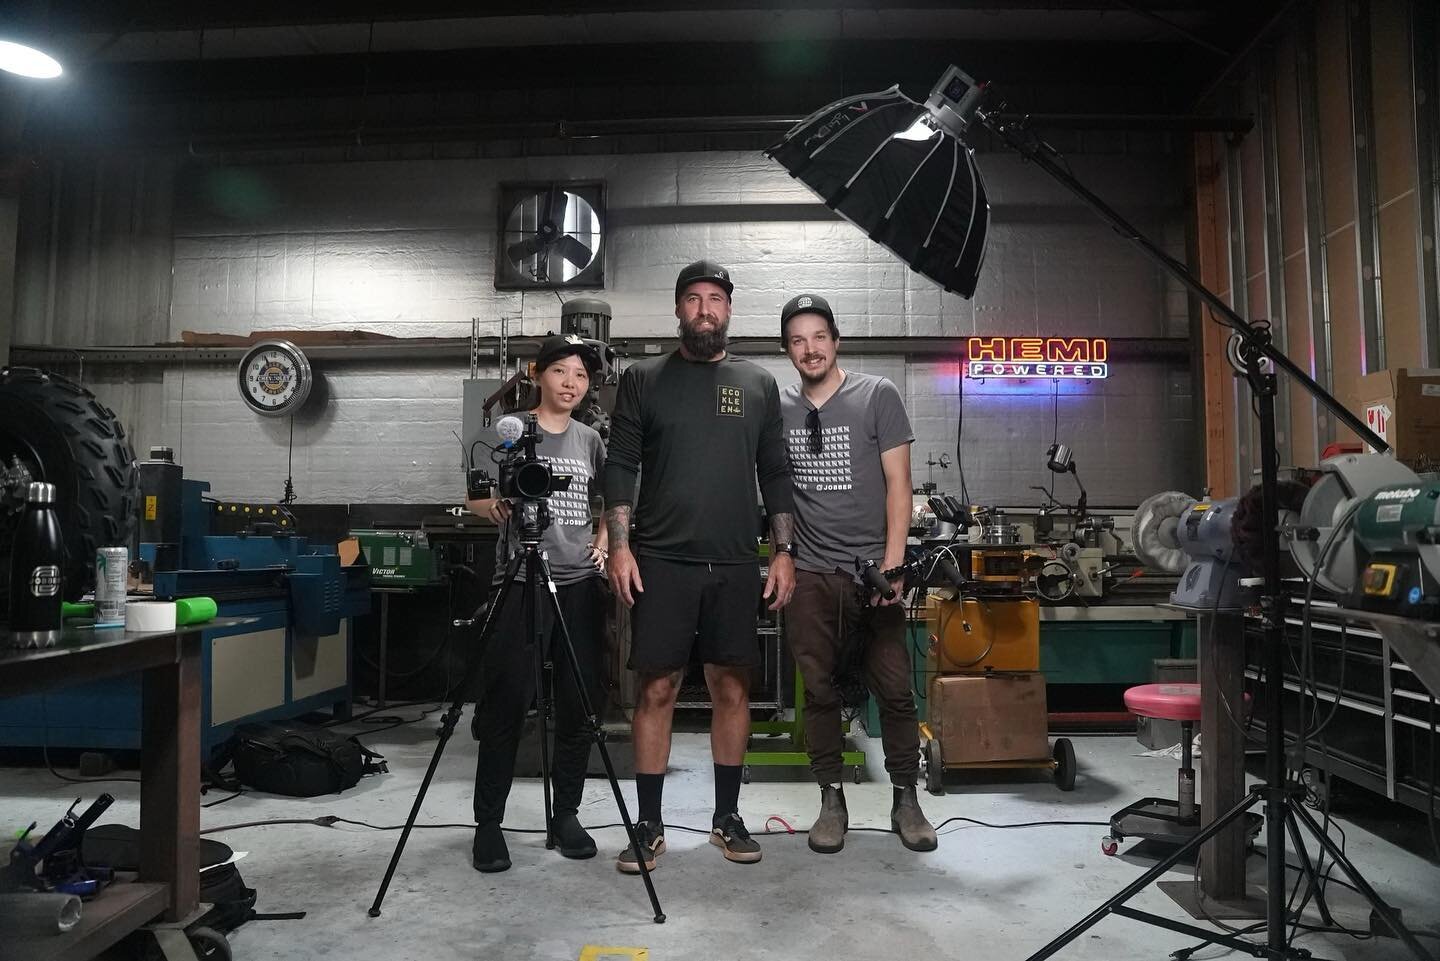 In case you missed it in our Stories: We got to hang with @jobber this week for their series, 𝙃𝙤𝙬 𝙩𝙤 𝙎𝙩𝙖𝙧𝙩 𝙖 𝙋𝙧𝙚𝙨𝙨𝙪𝙧𝙚 𝙒𝙖𝙨𝙝𝙞𝙣𝙜 𝘽𝙪𝙨𝙞𝙣𝙚𝙨𝙨. 

It was such an honor to be considered + casted for this feature, but even more